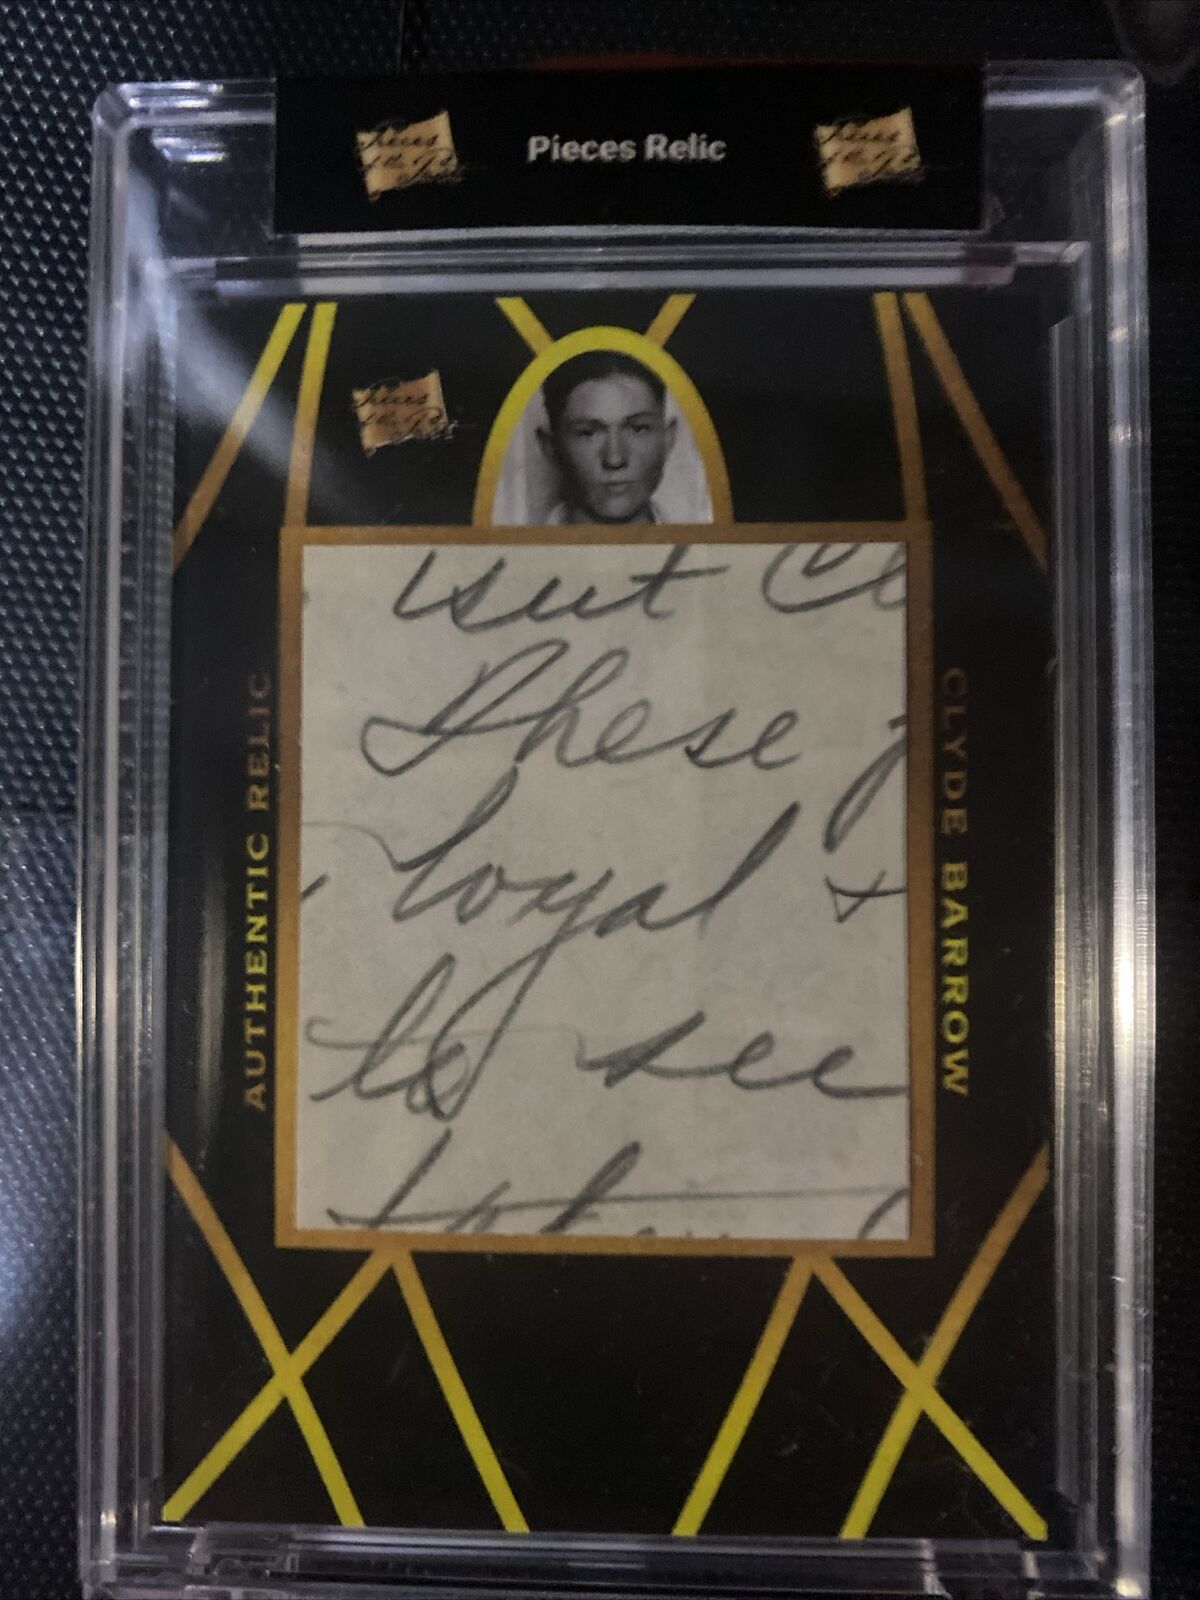 Bonnie And Clyde - Handwriting Loyal- Priceless- 1 Of 1 pieces of the past Relic